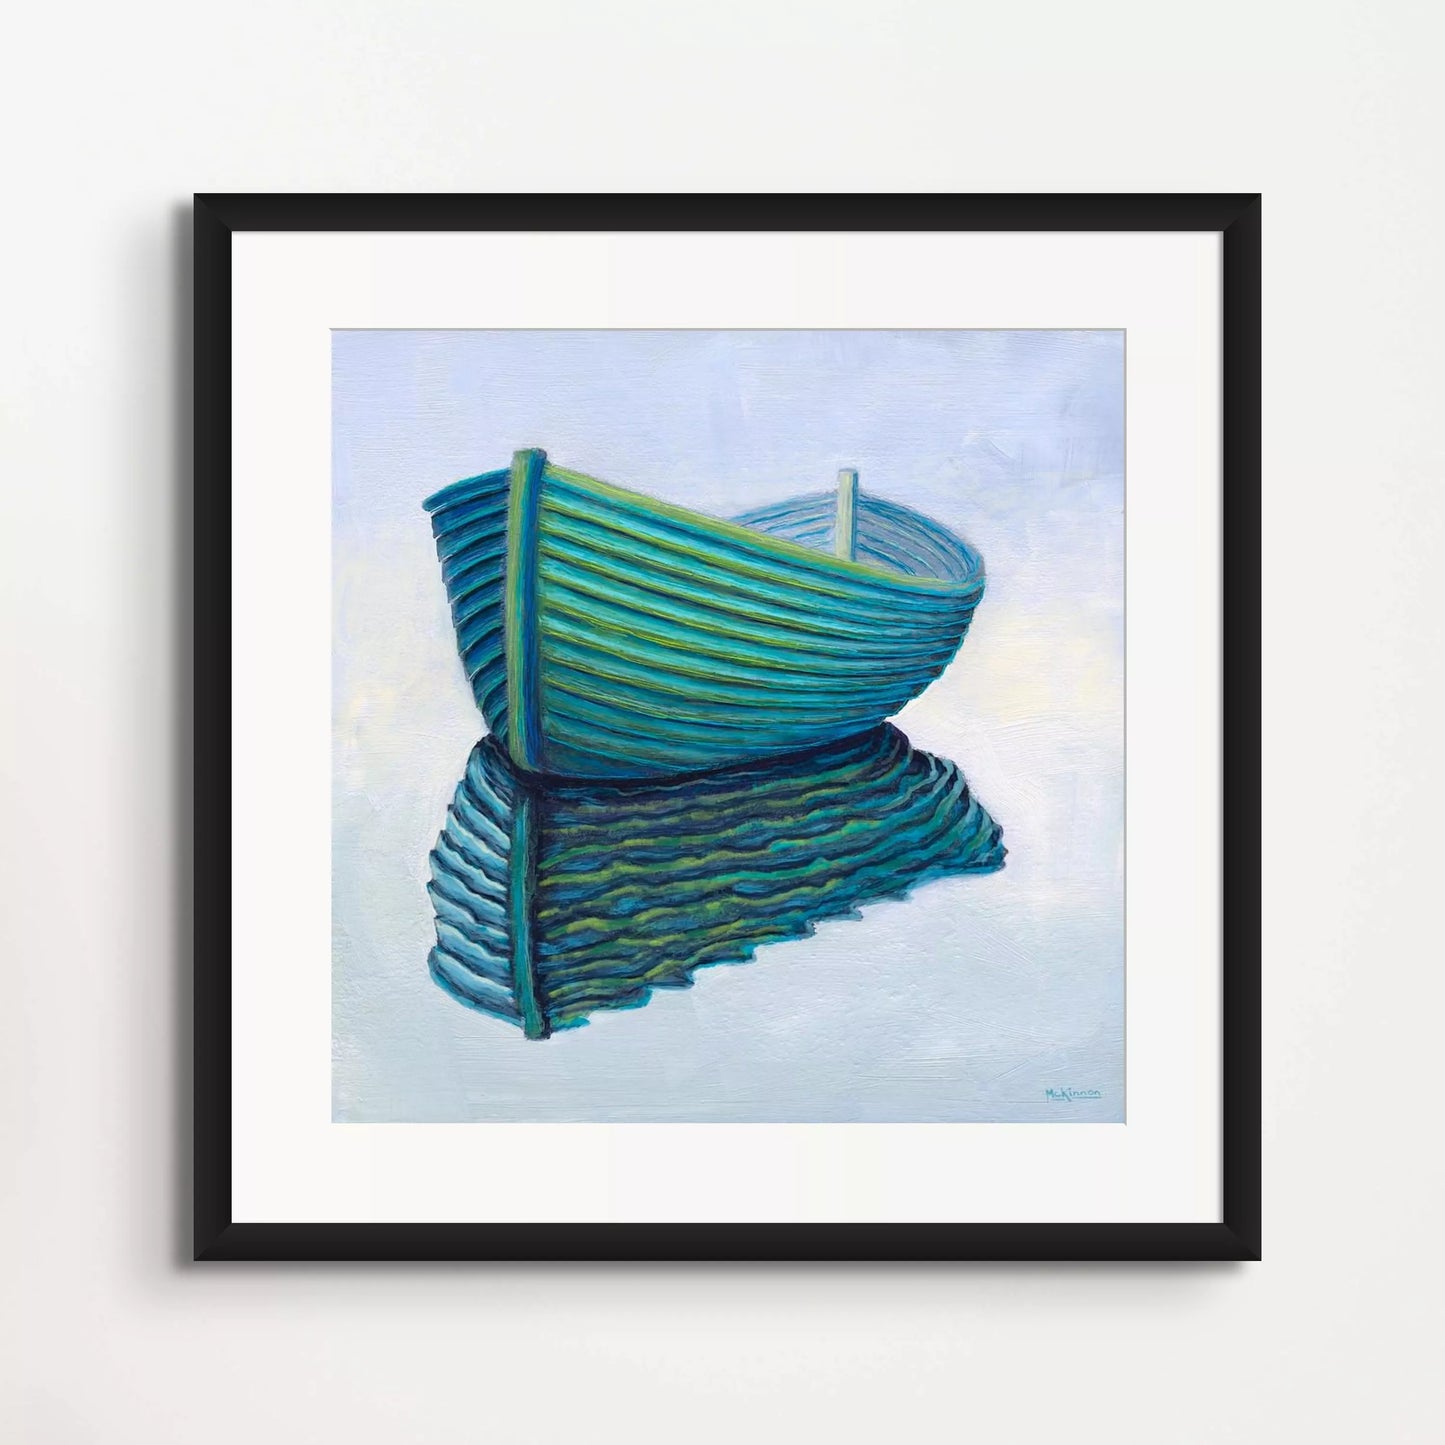 Teal Abstract Art - Original Turquoise Rowboat Painting - Coastal Framed Print